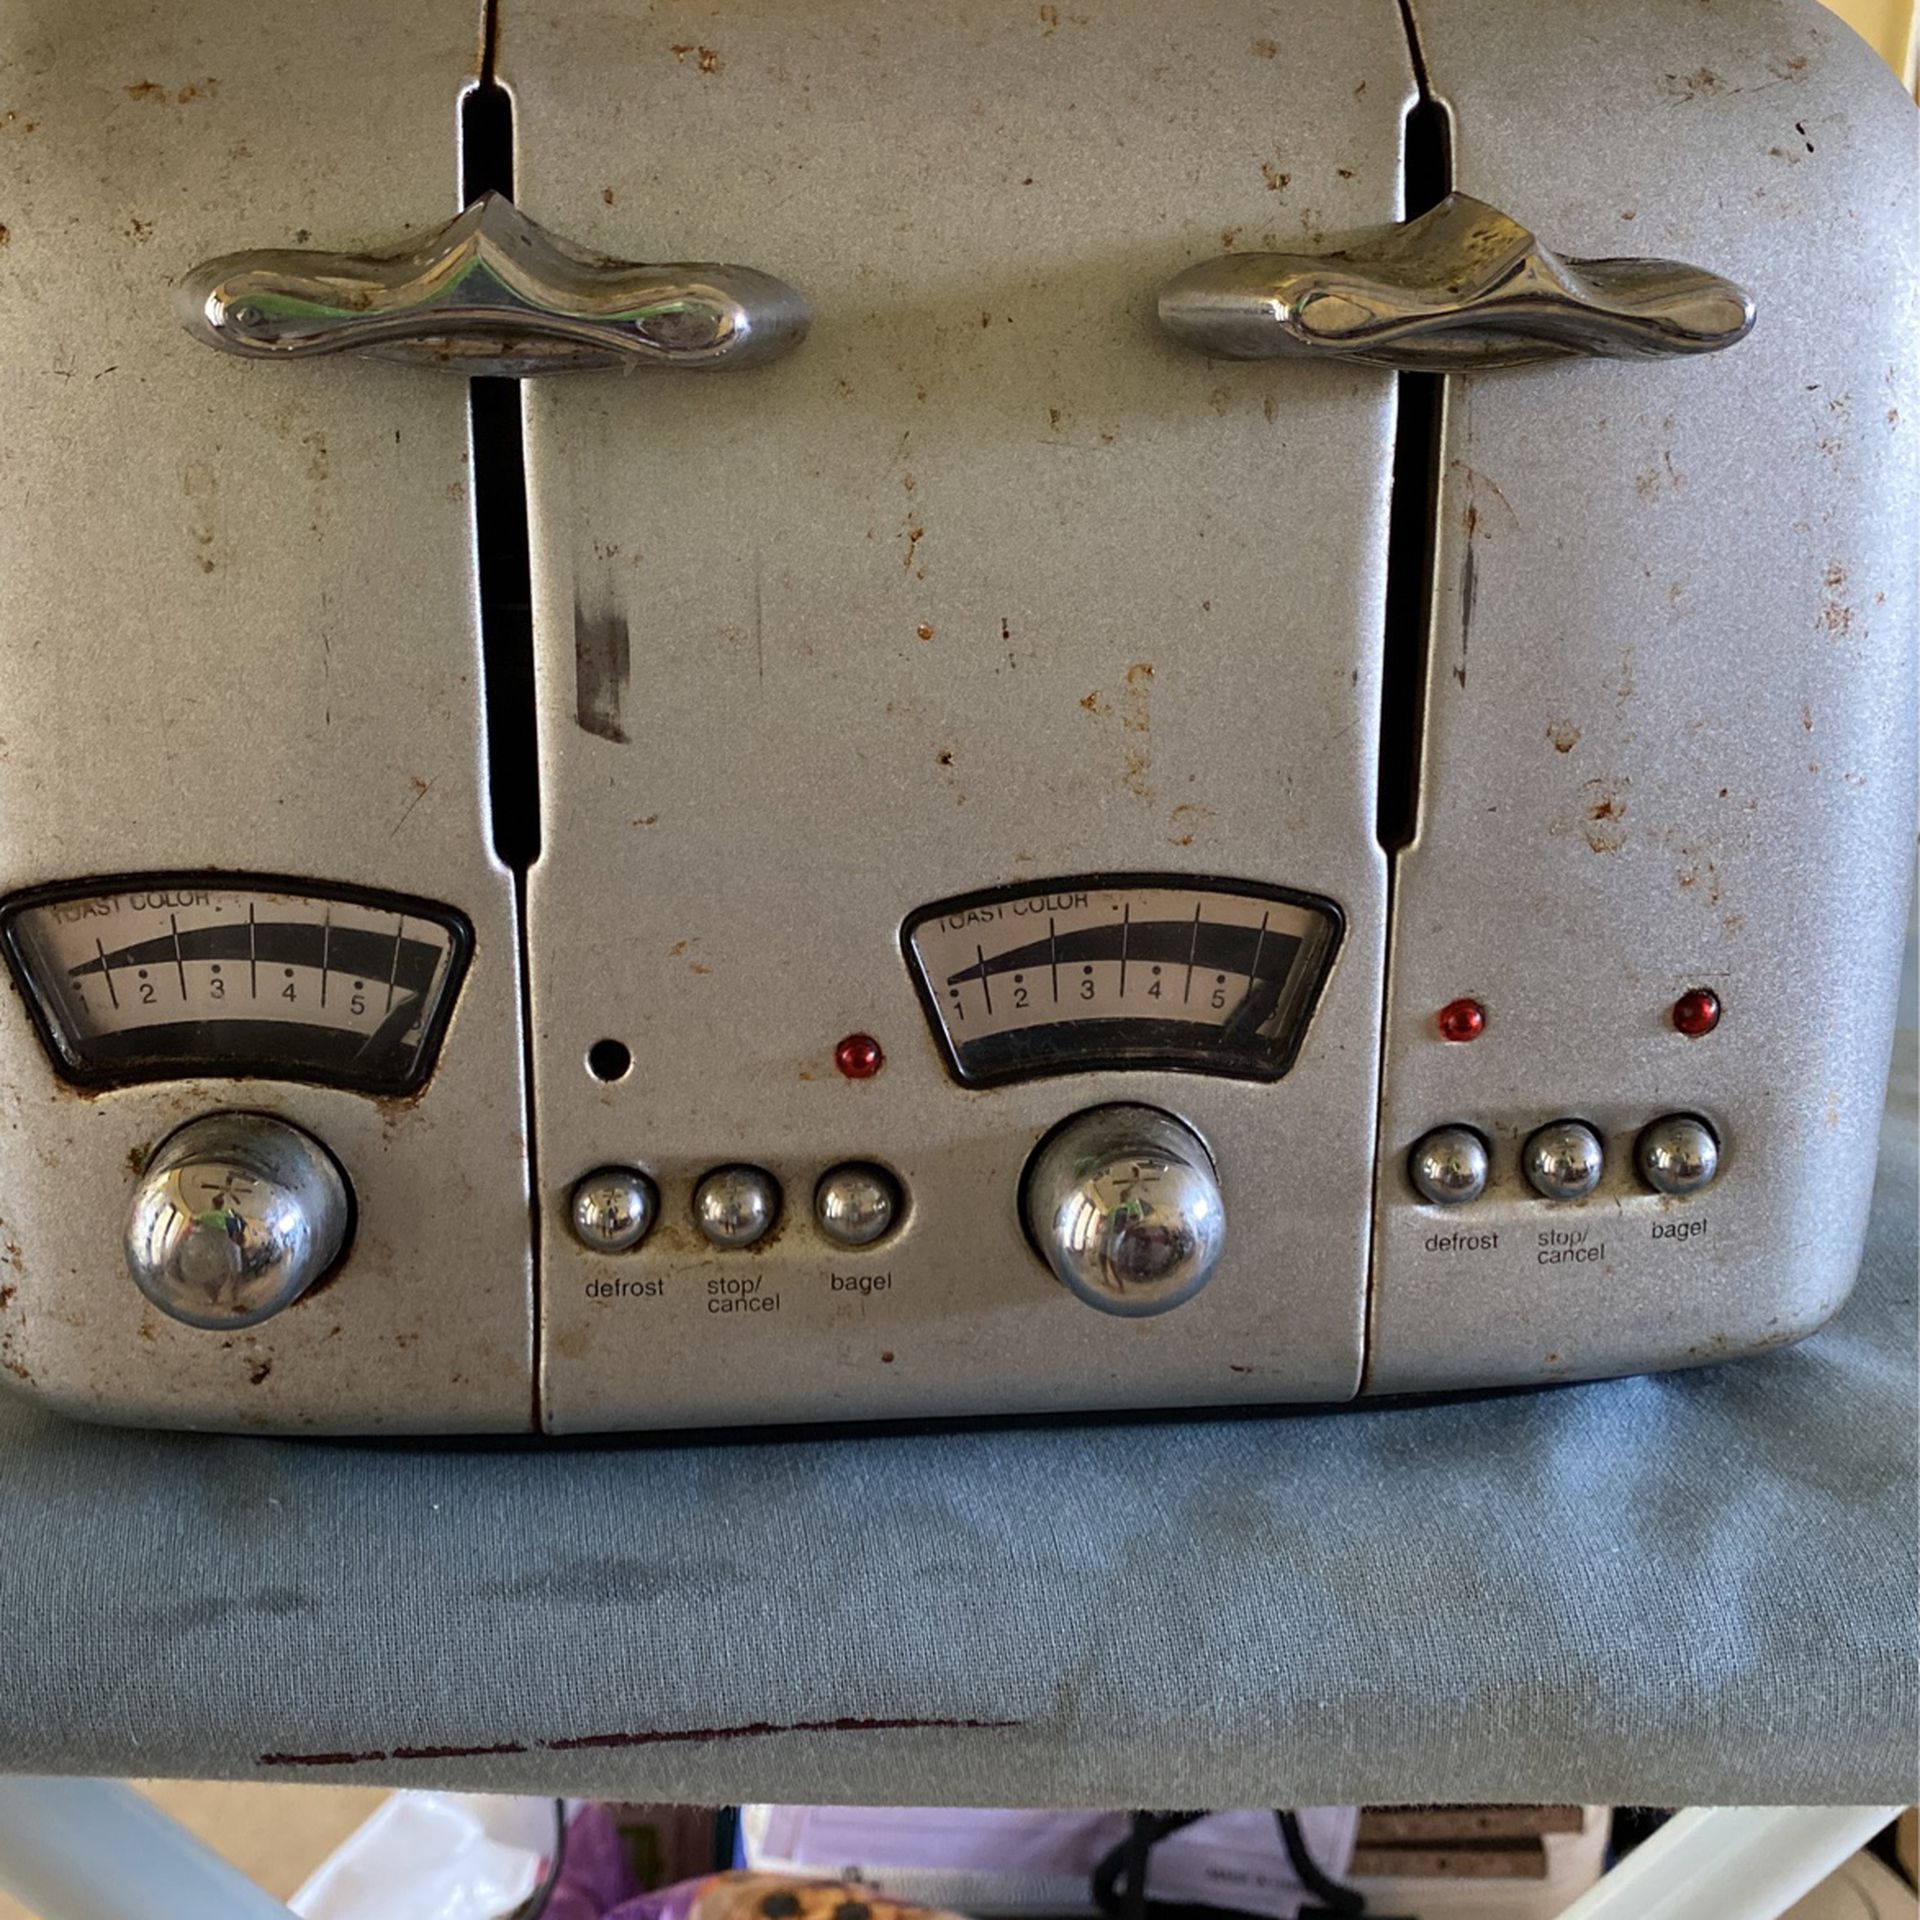 Toaster-4 Slices Of Bread-Silver, 